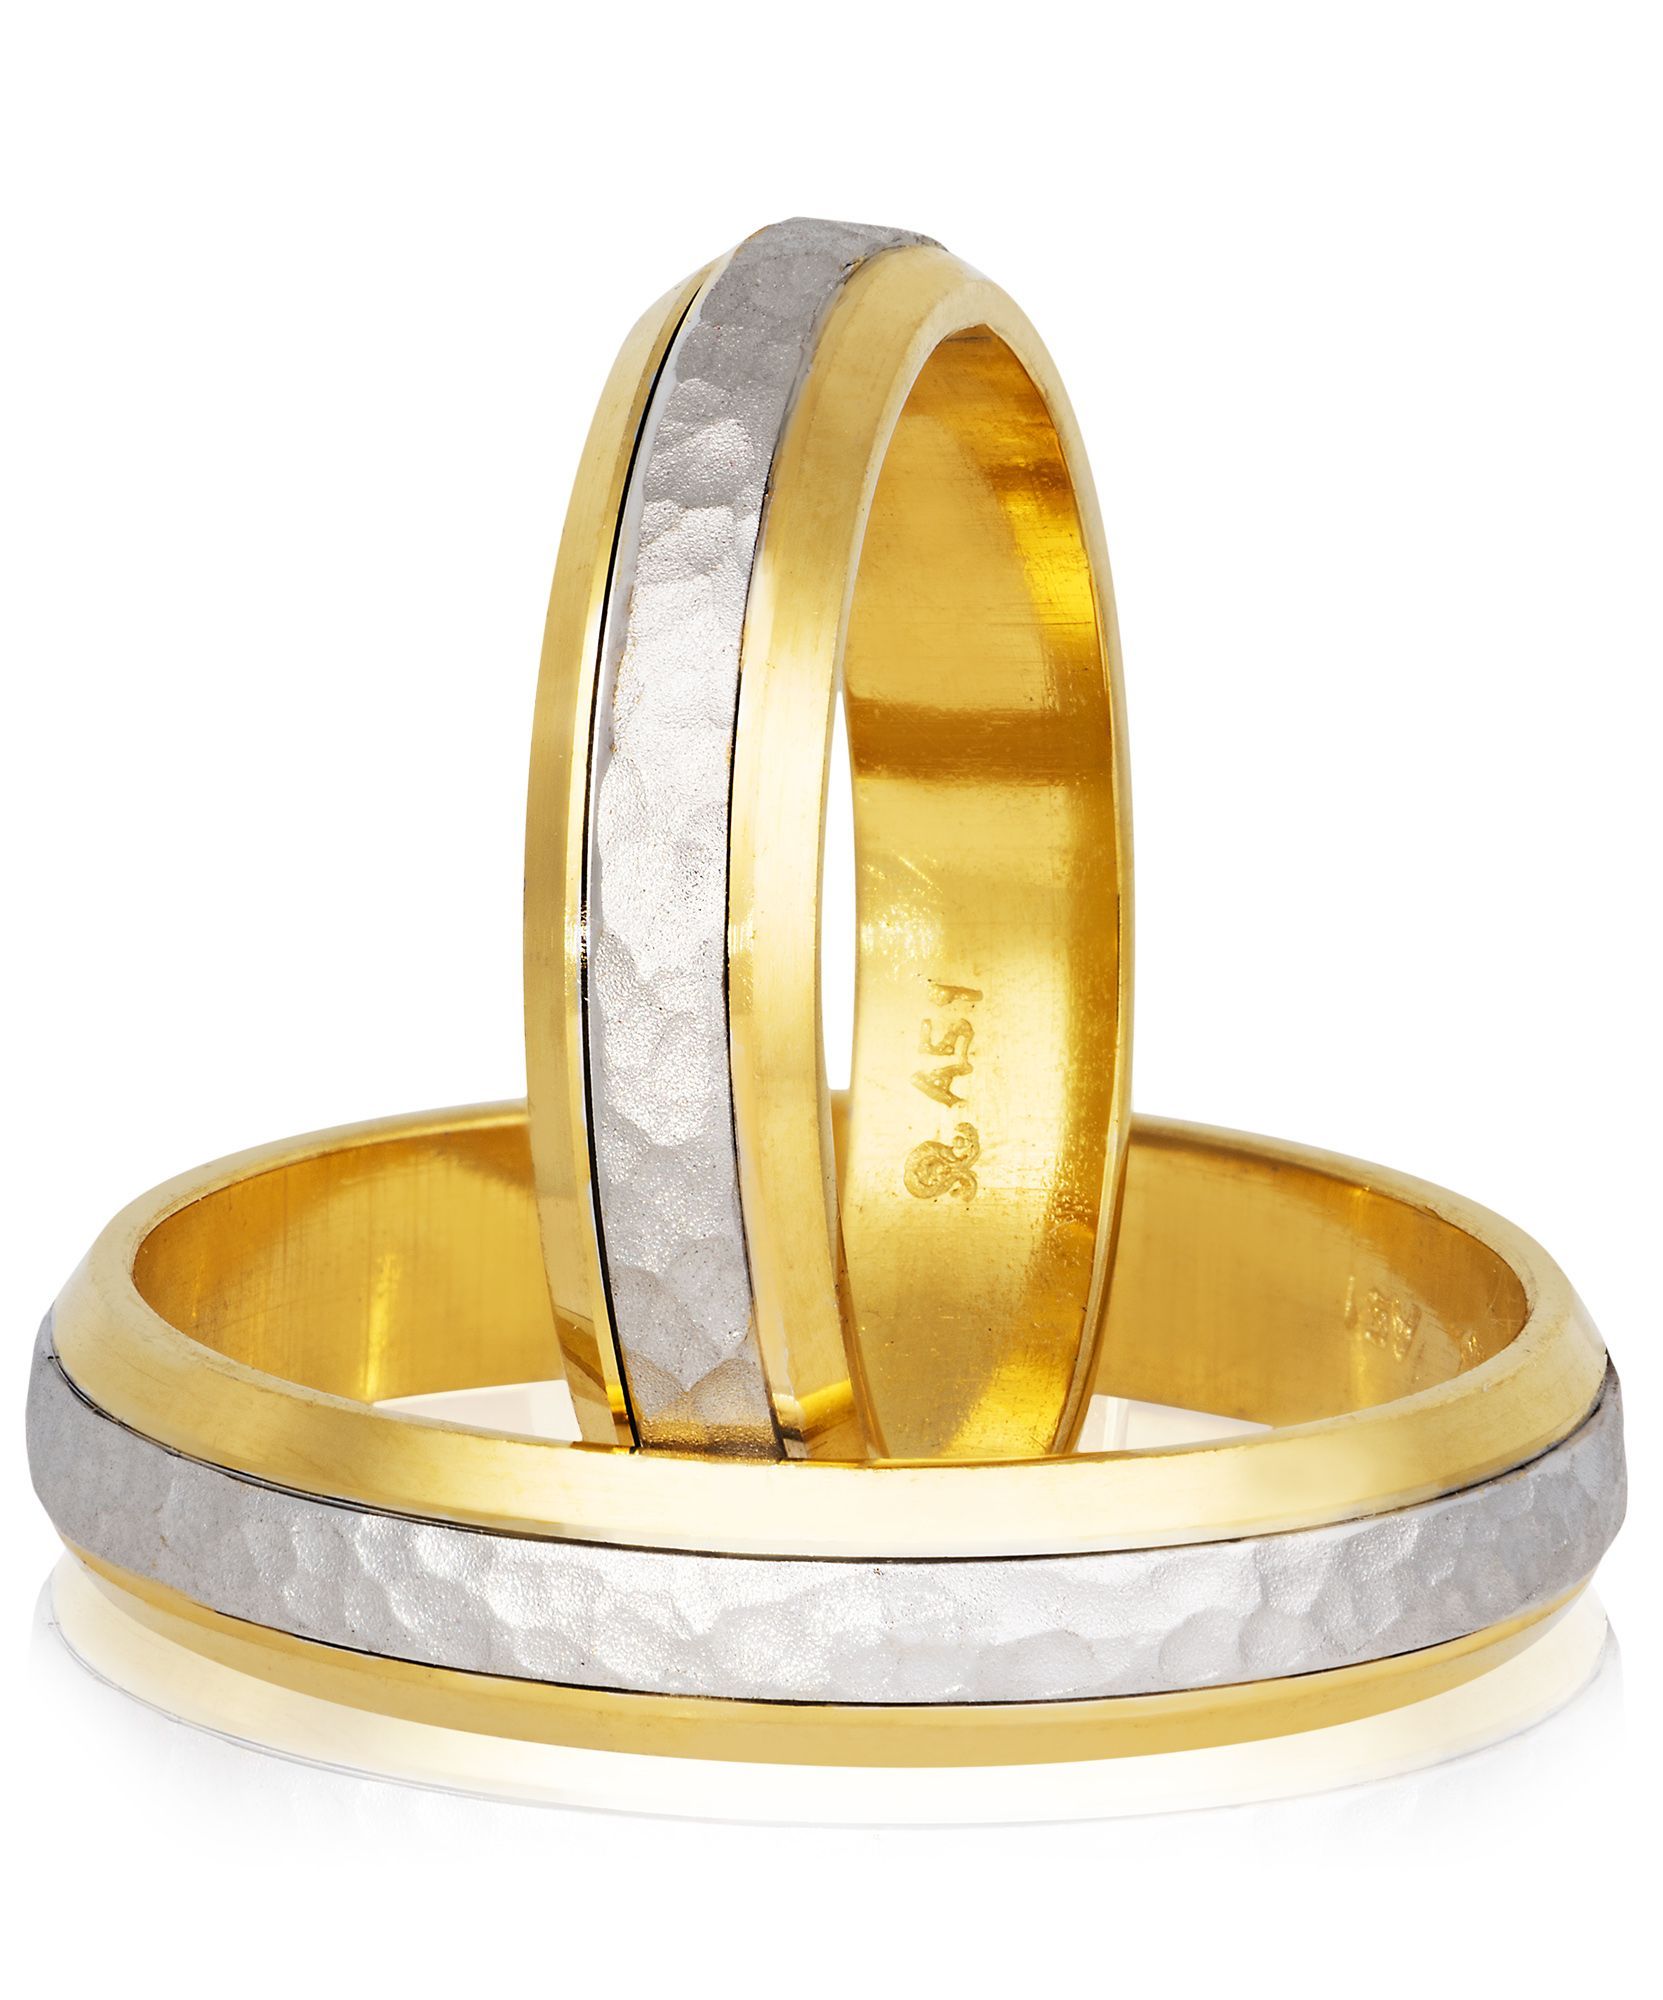 White gold & yellow gold wedding rings 4.5mm (code S61)